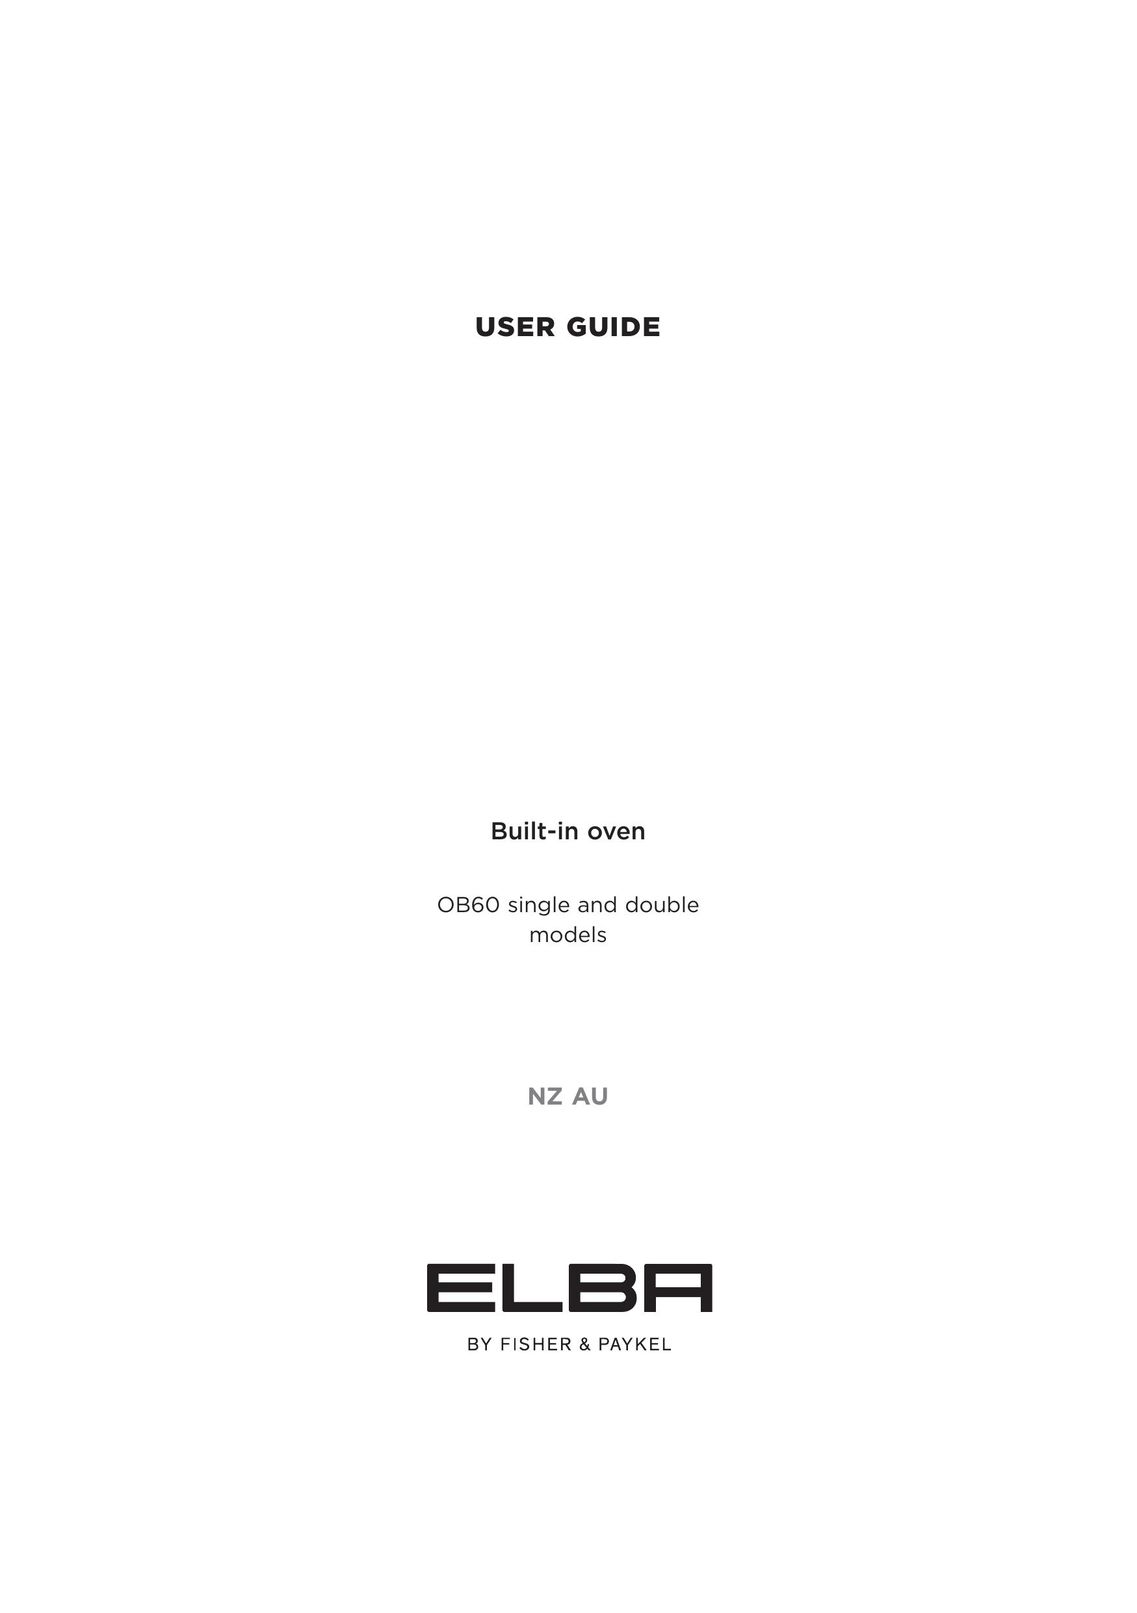 Fisher & Paykel OB60 Oven User Manual